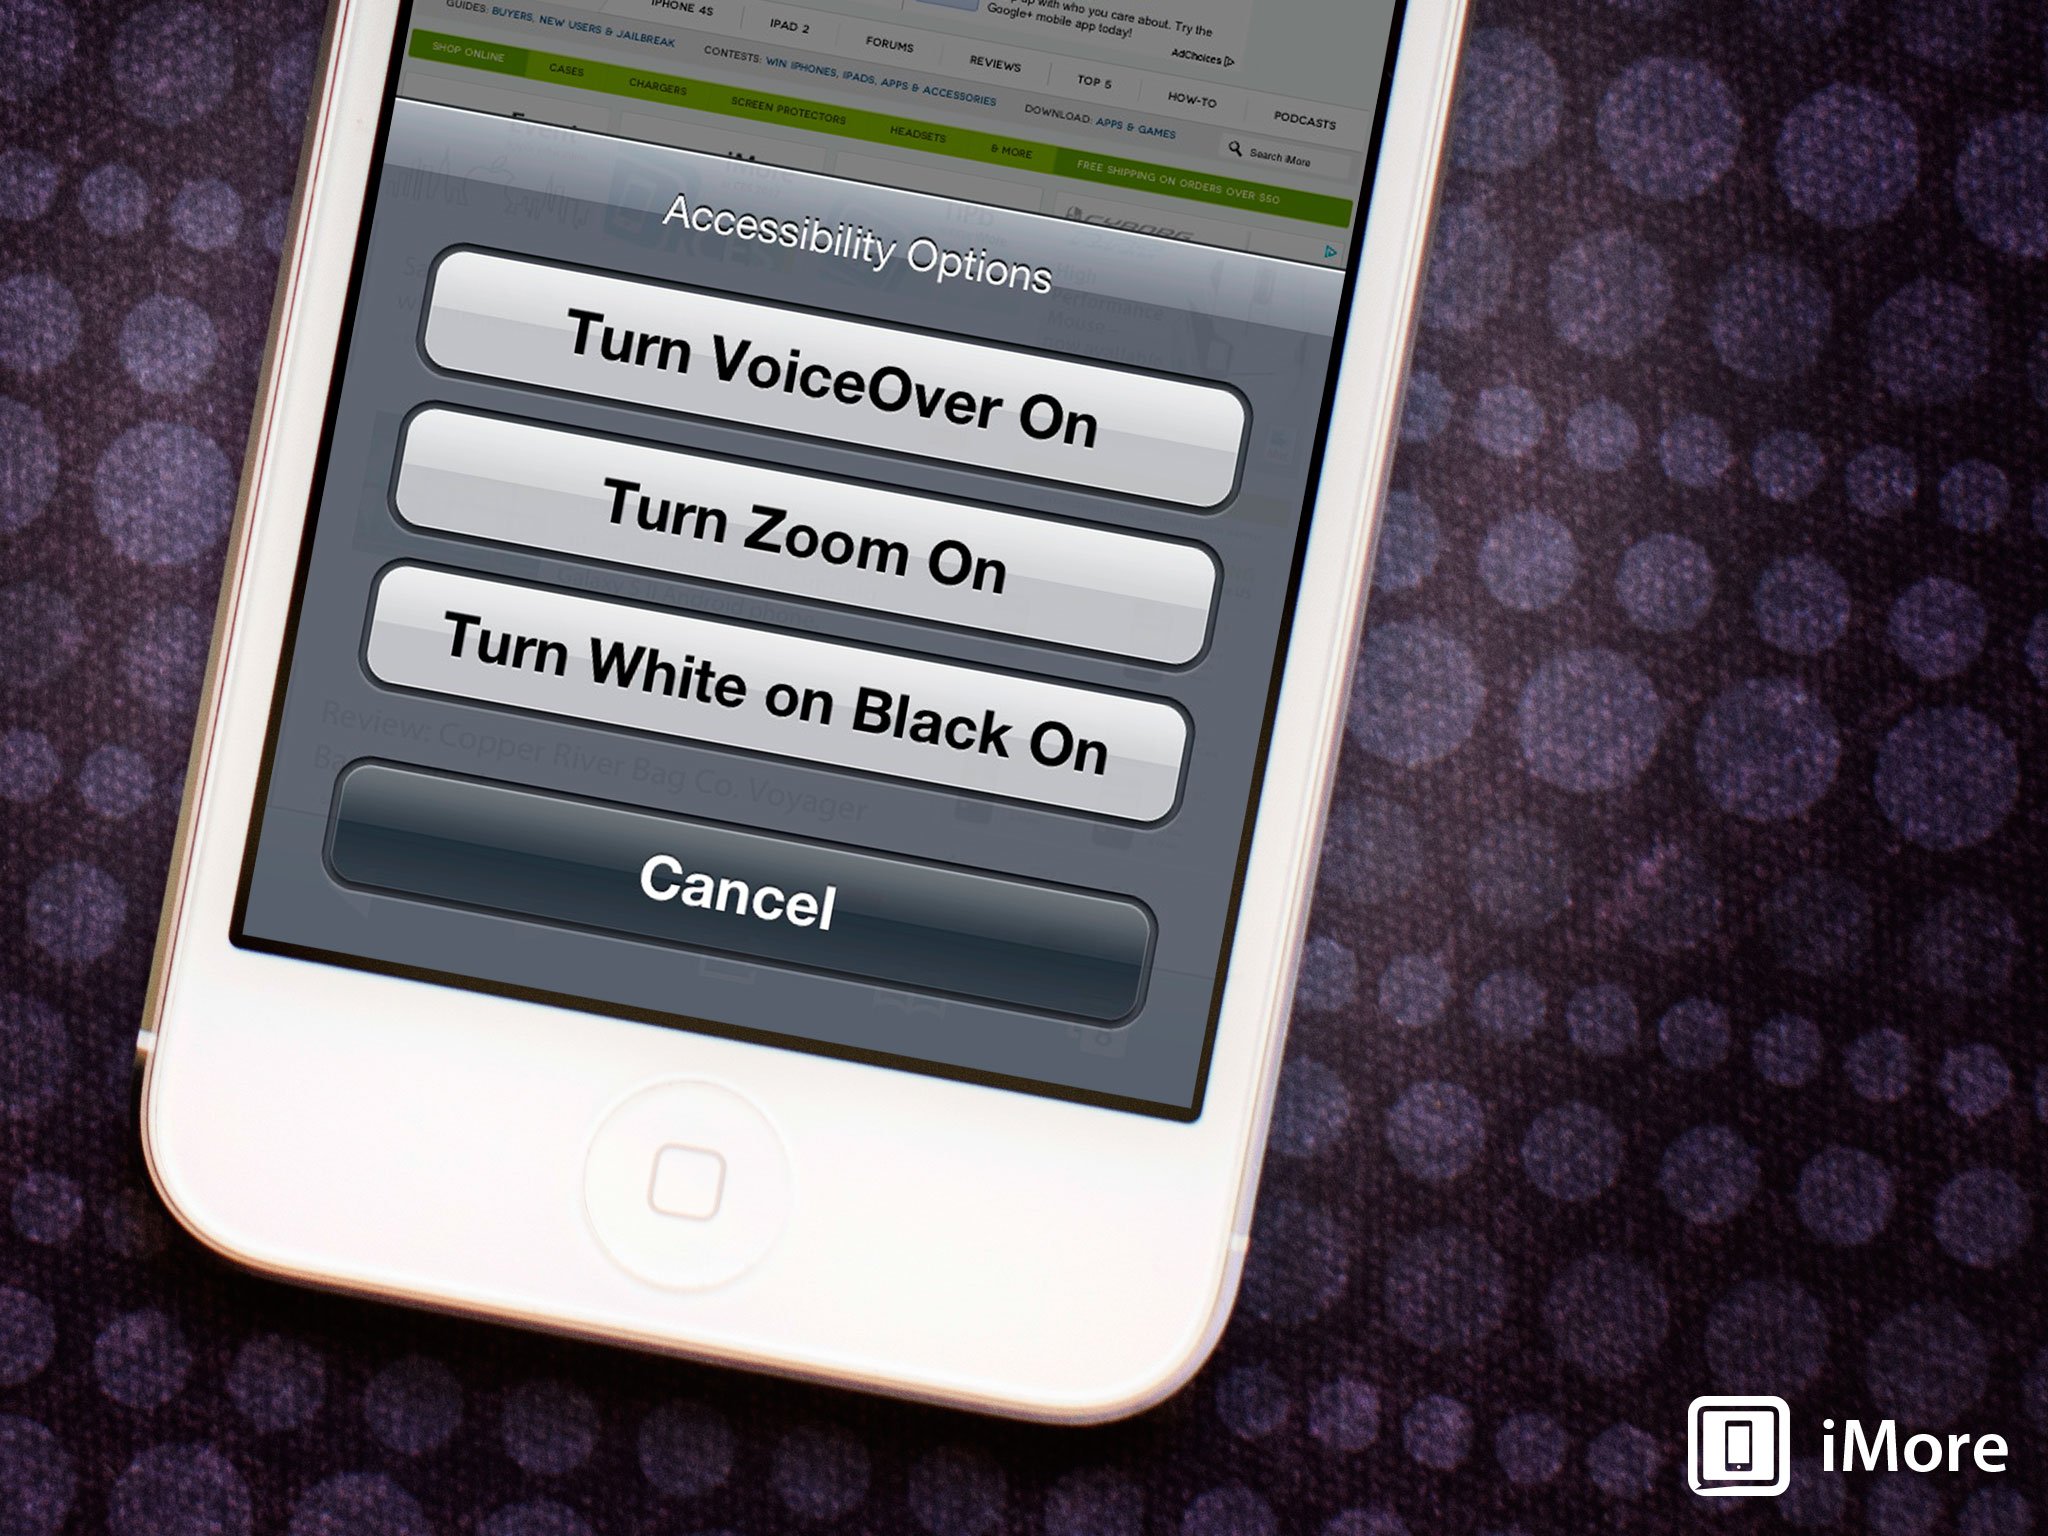 How to quickly get to zoom, voice over, and accessibility options